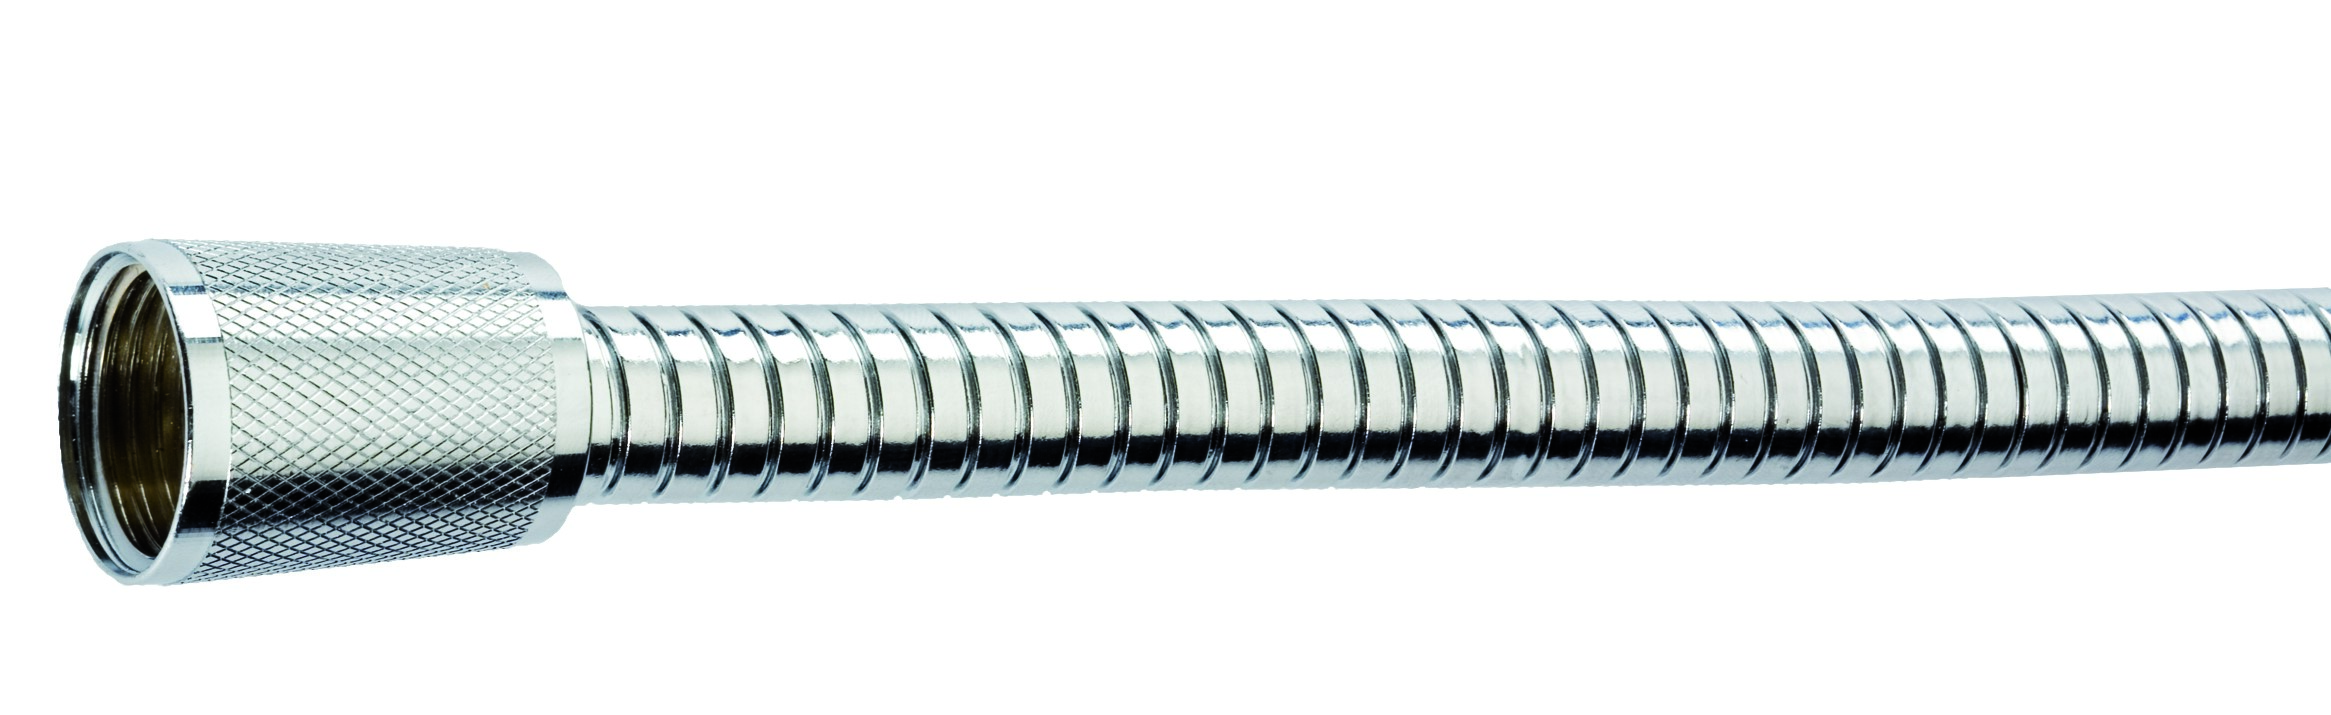 Shower hose double agraff, stainless steel, 175 cm